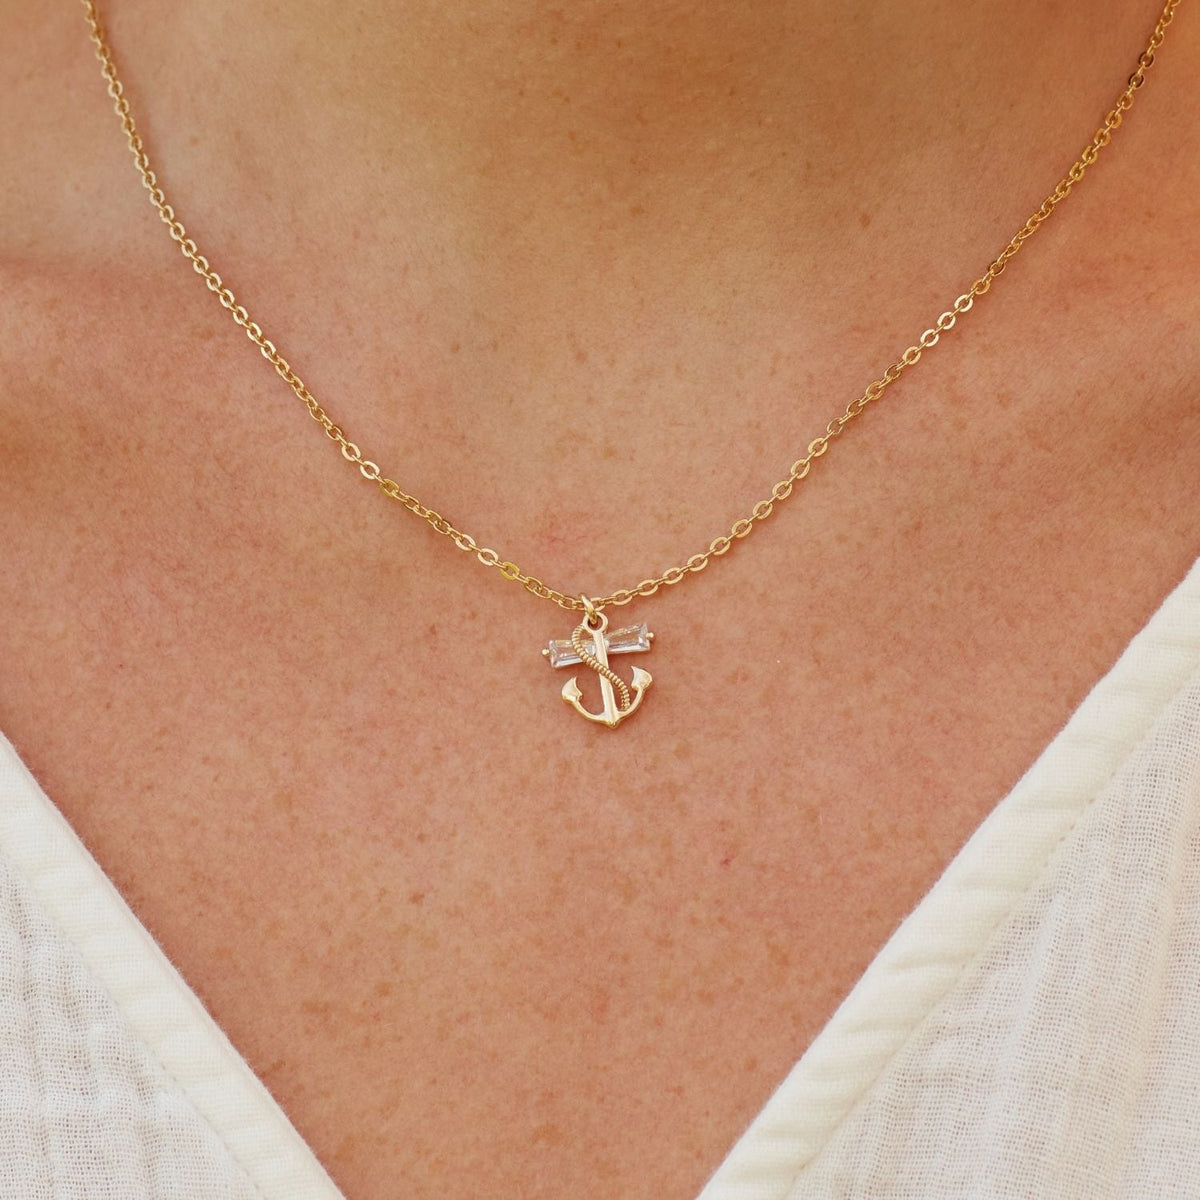 Gift for Bridesmaid | Will You Be My Bridesmaid? | Anchor Necklace